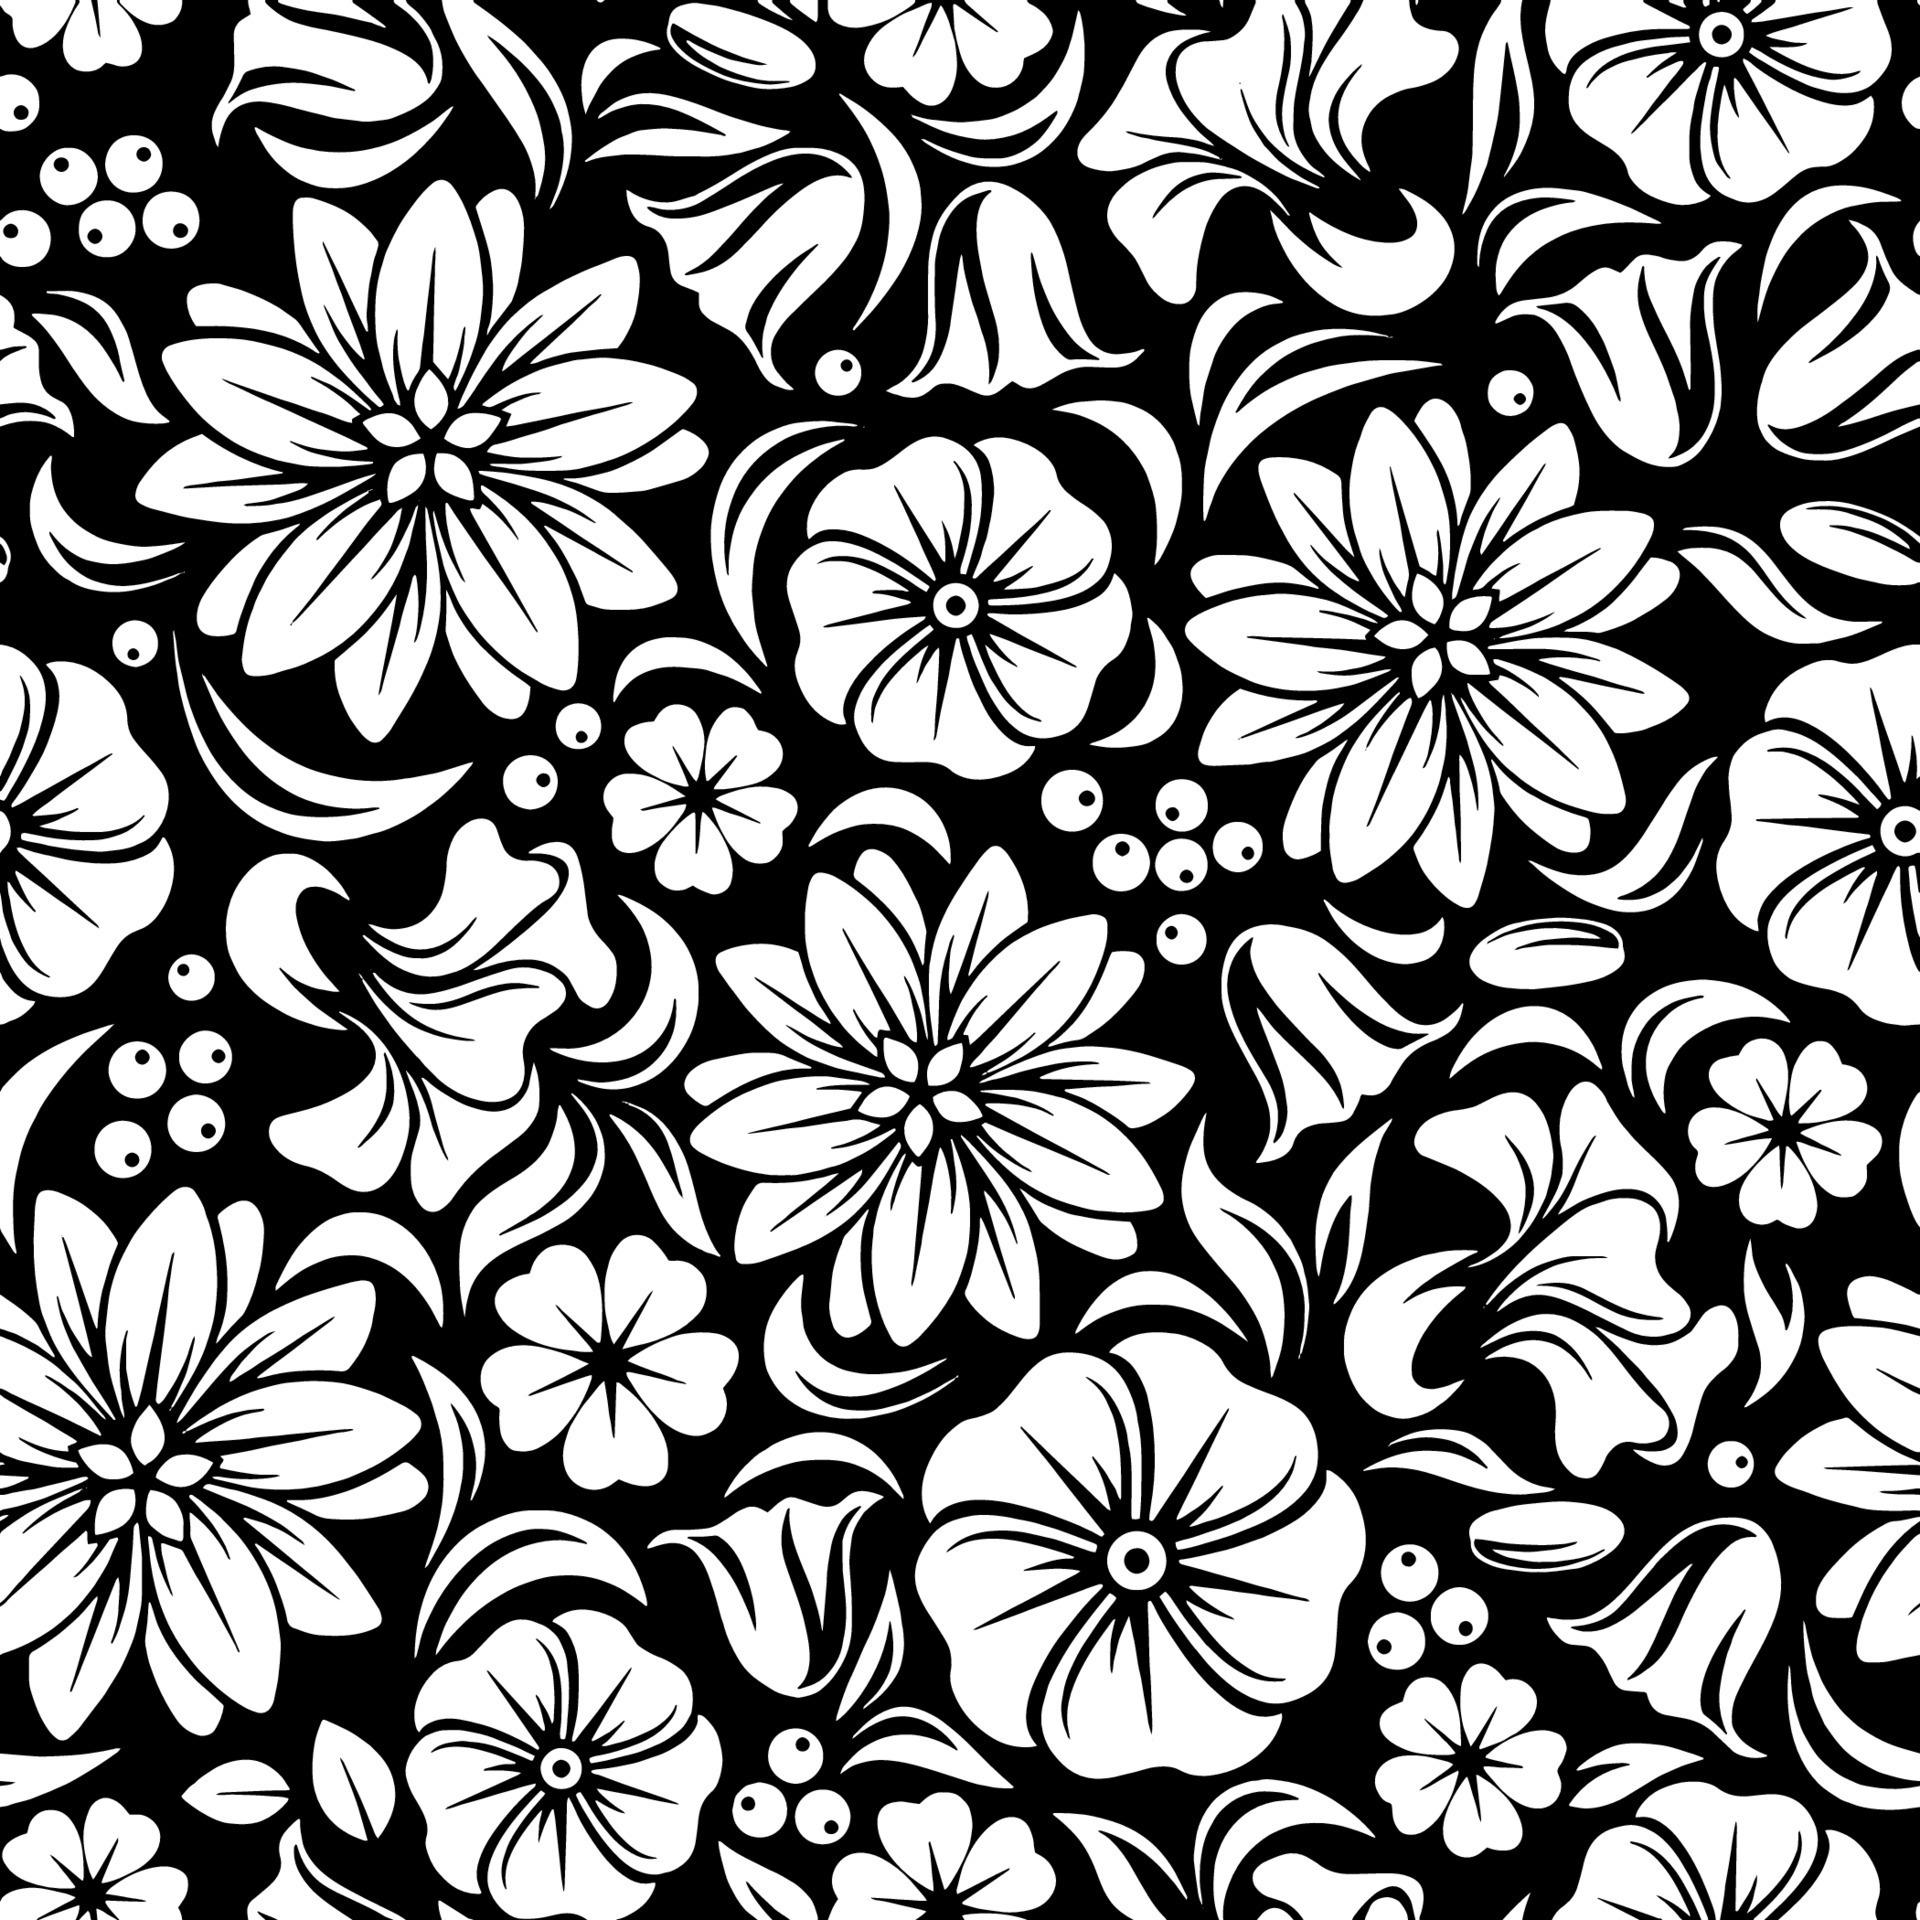 Discover more than 65 black background floral wallpaper best - in